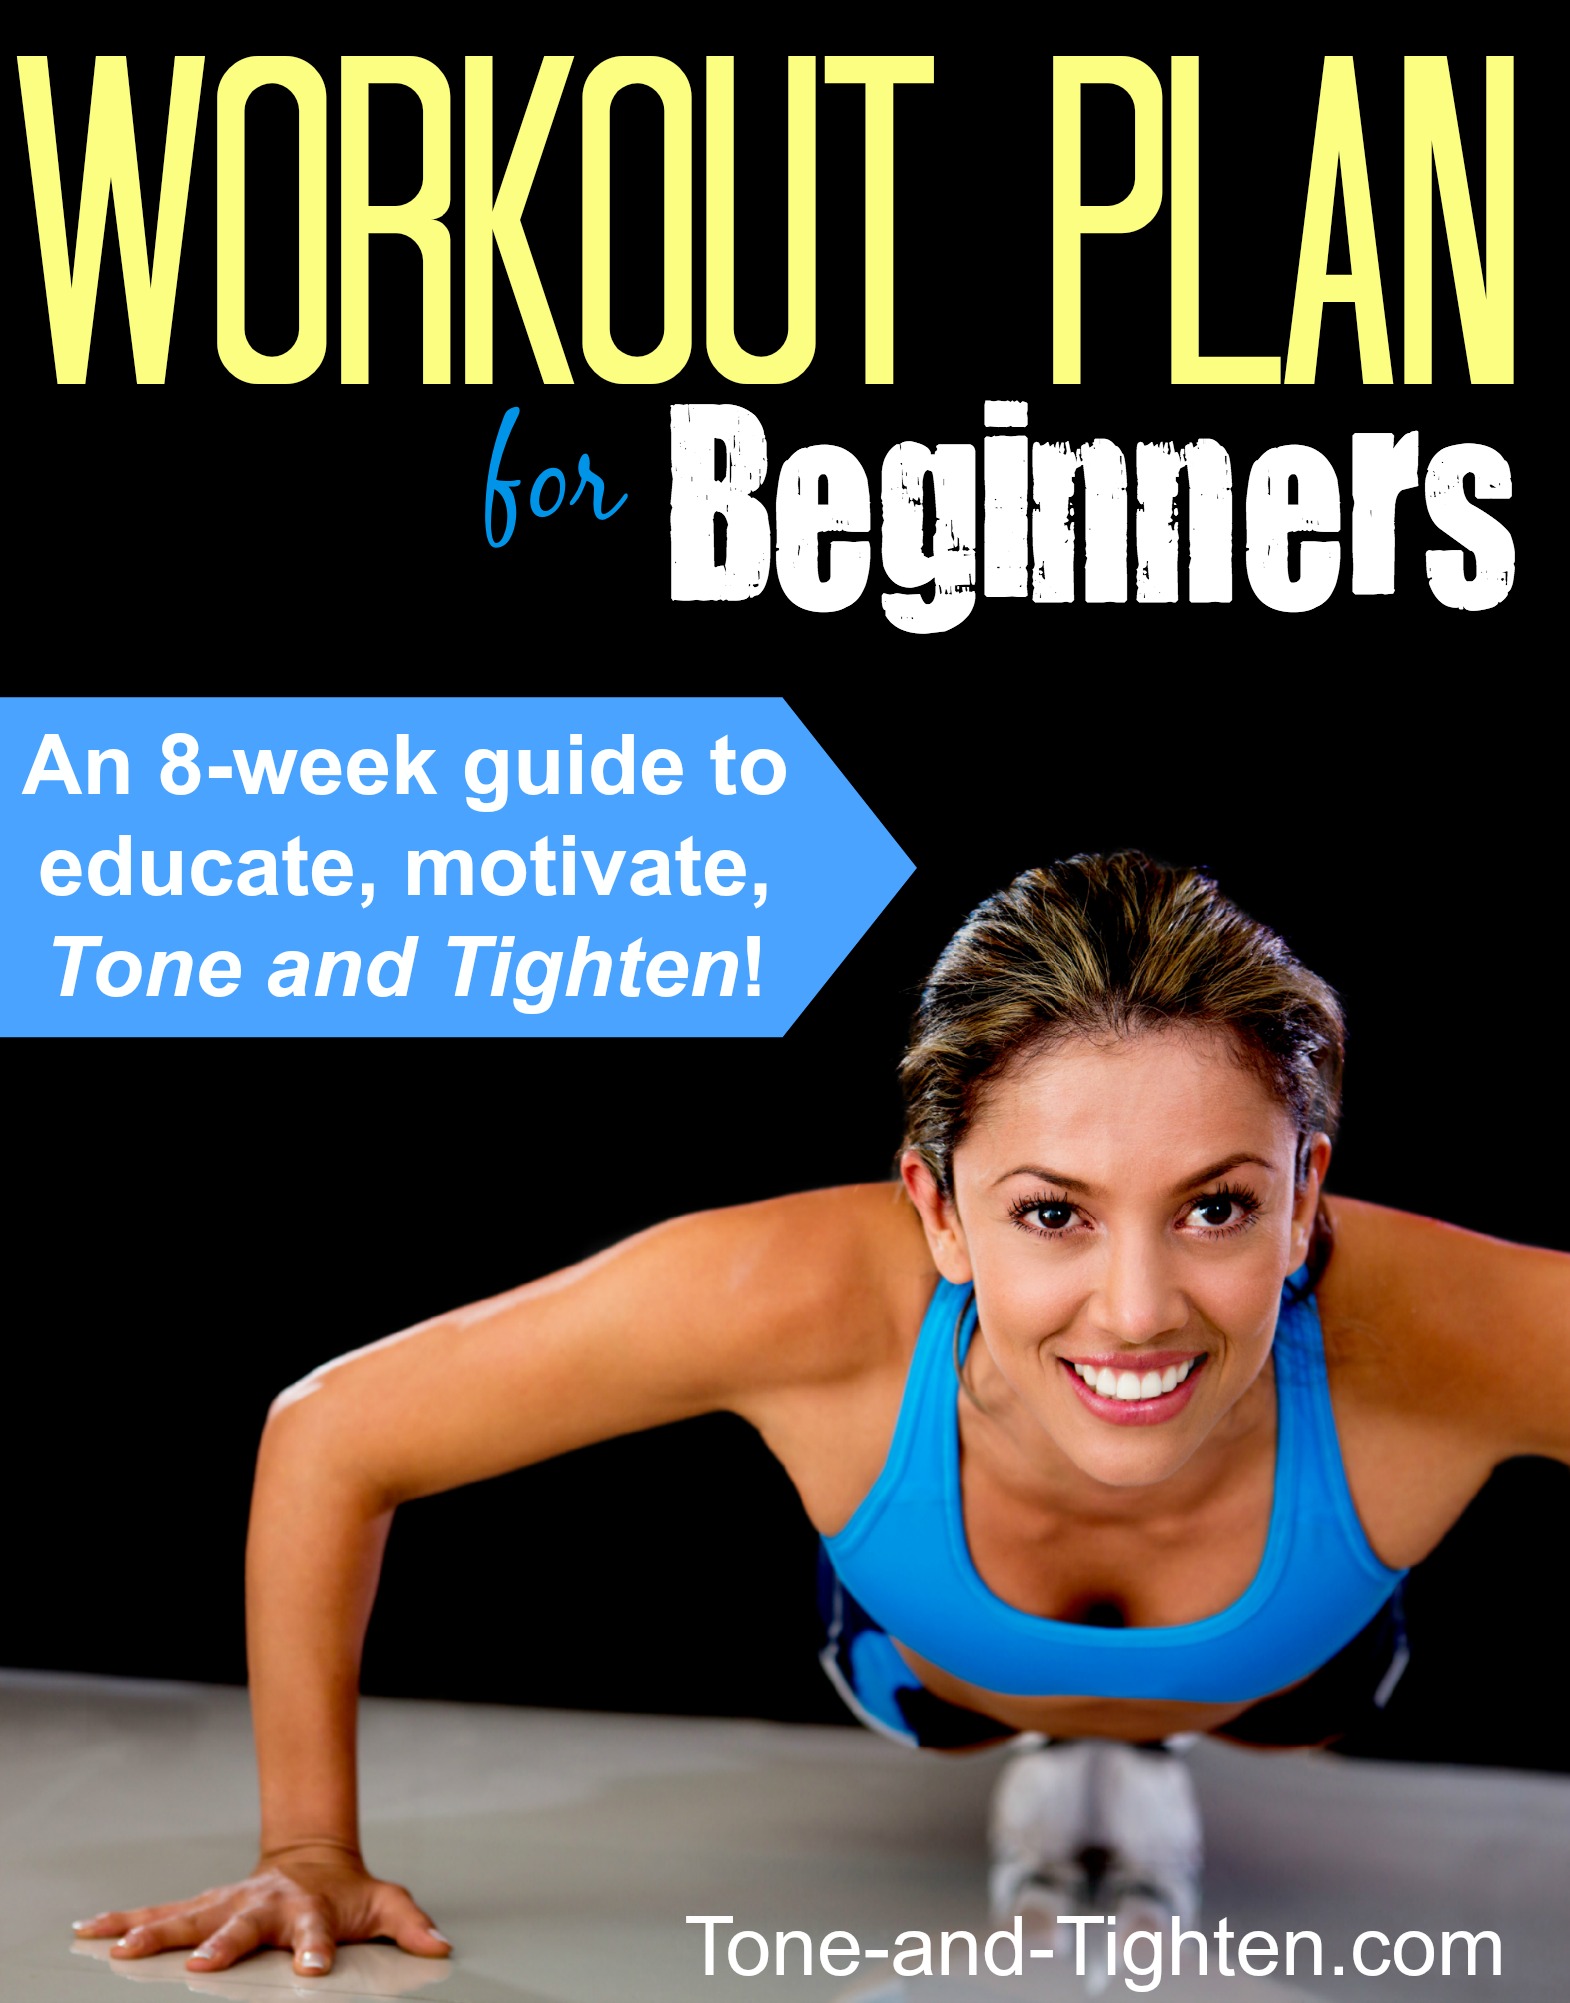 Tone and Tighten’s 8-Week Workout Guide for Beginners